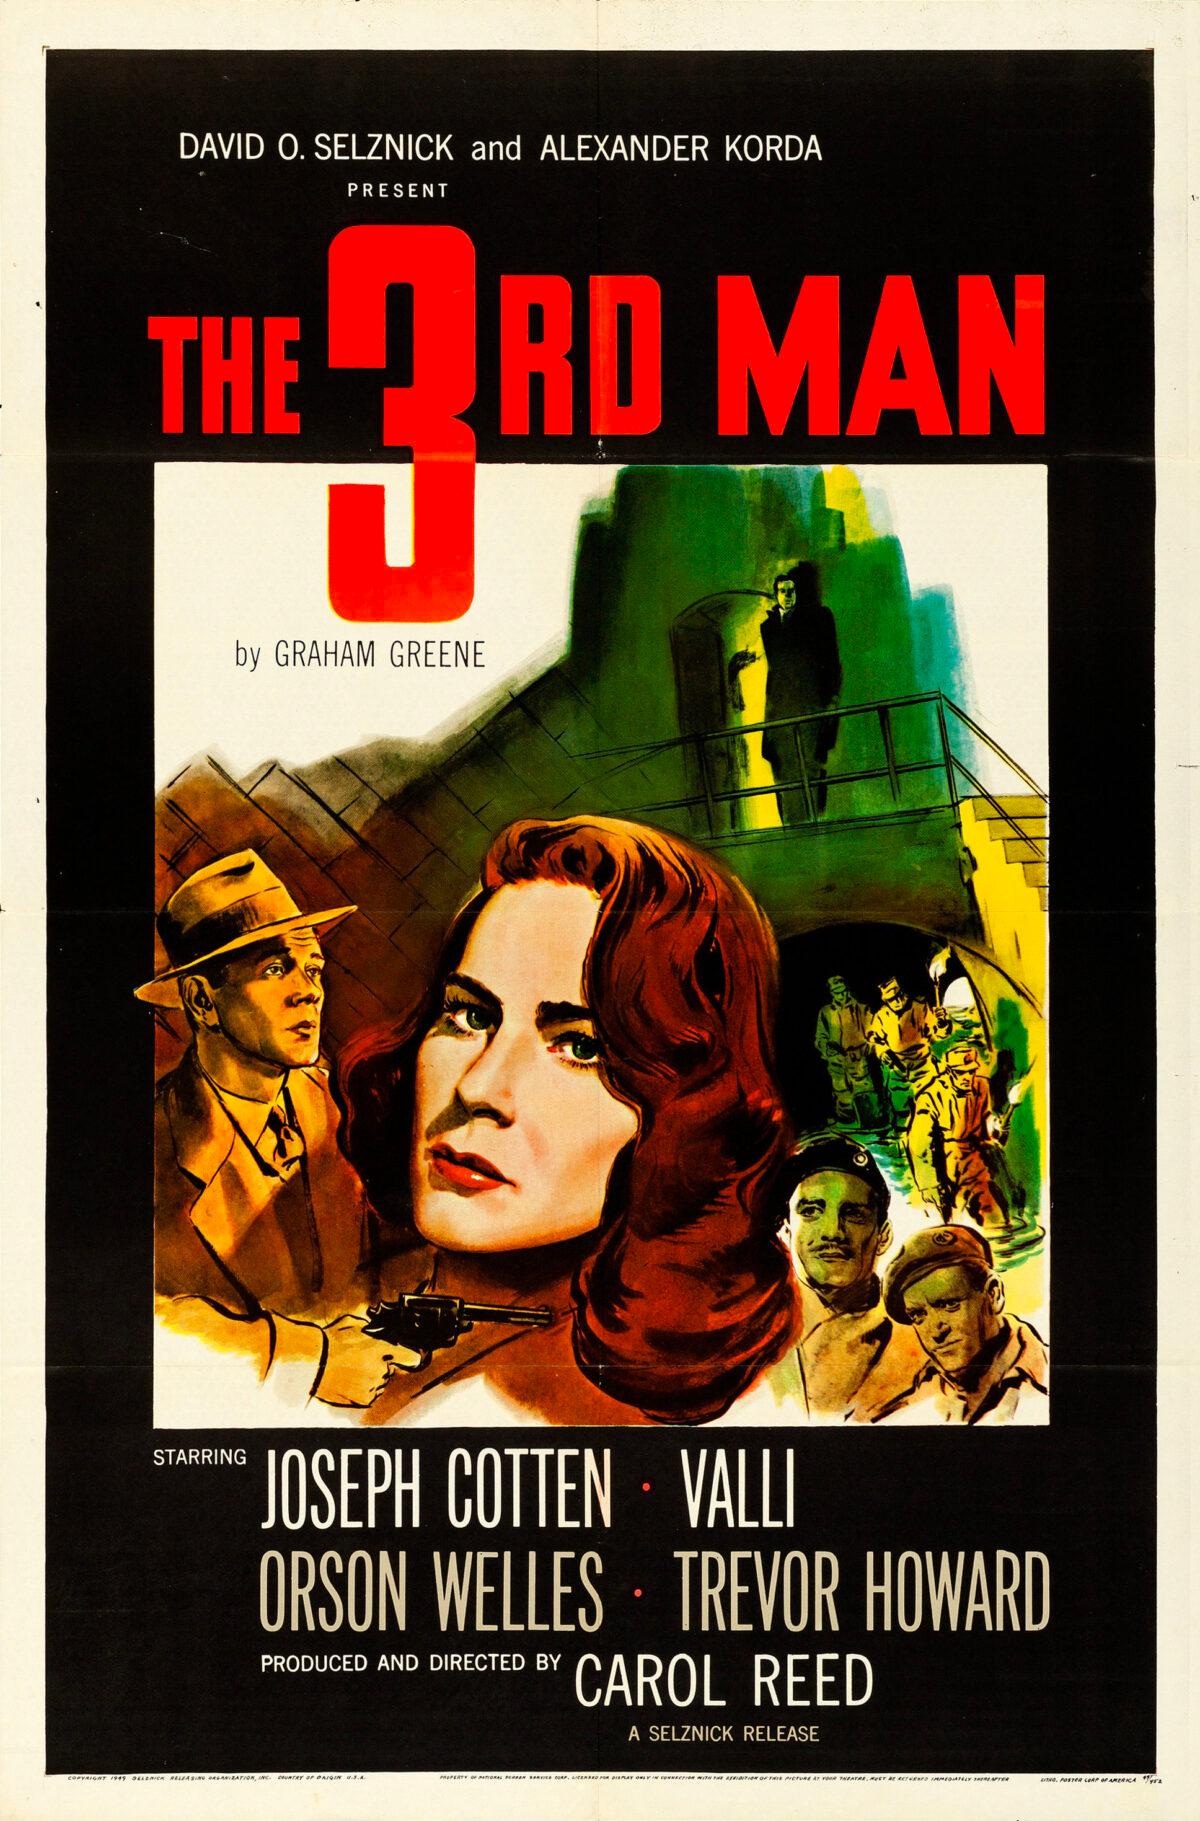 Theatrical poster for the American release of the 1949 film "The Third Man." (Public Domain)